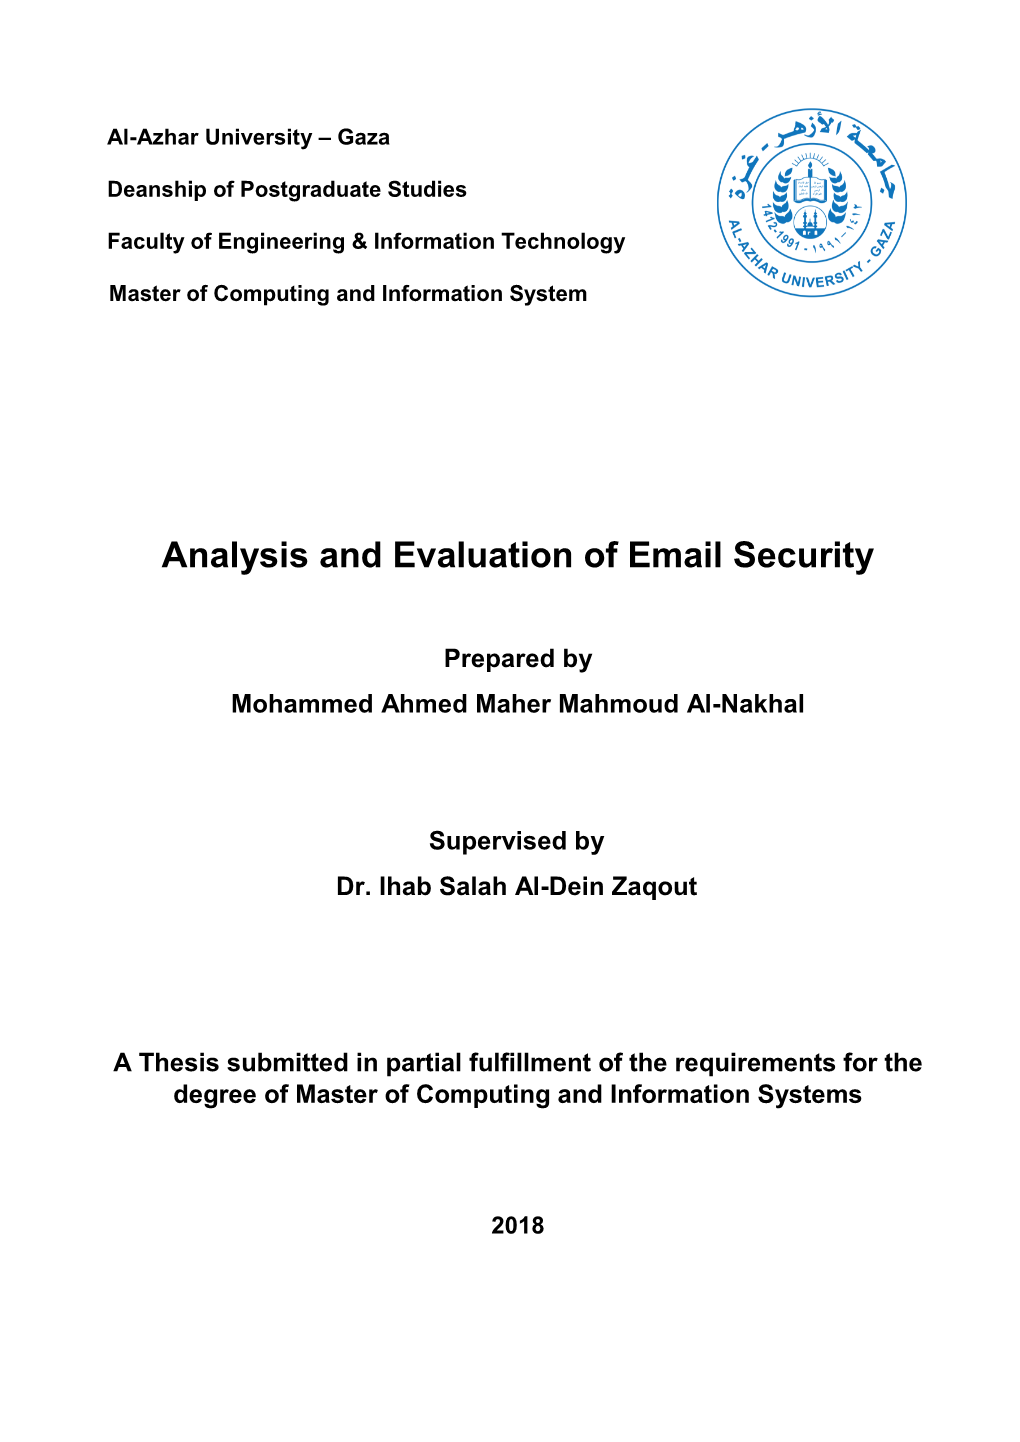 Analysis and Evaluation of Email Security